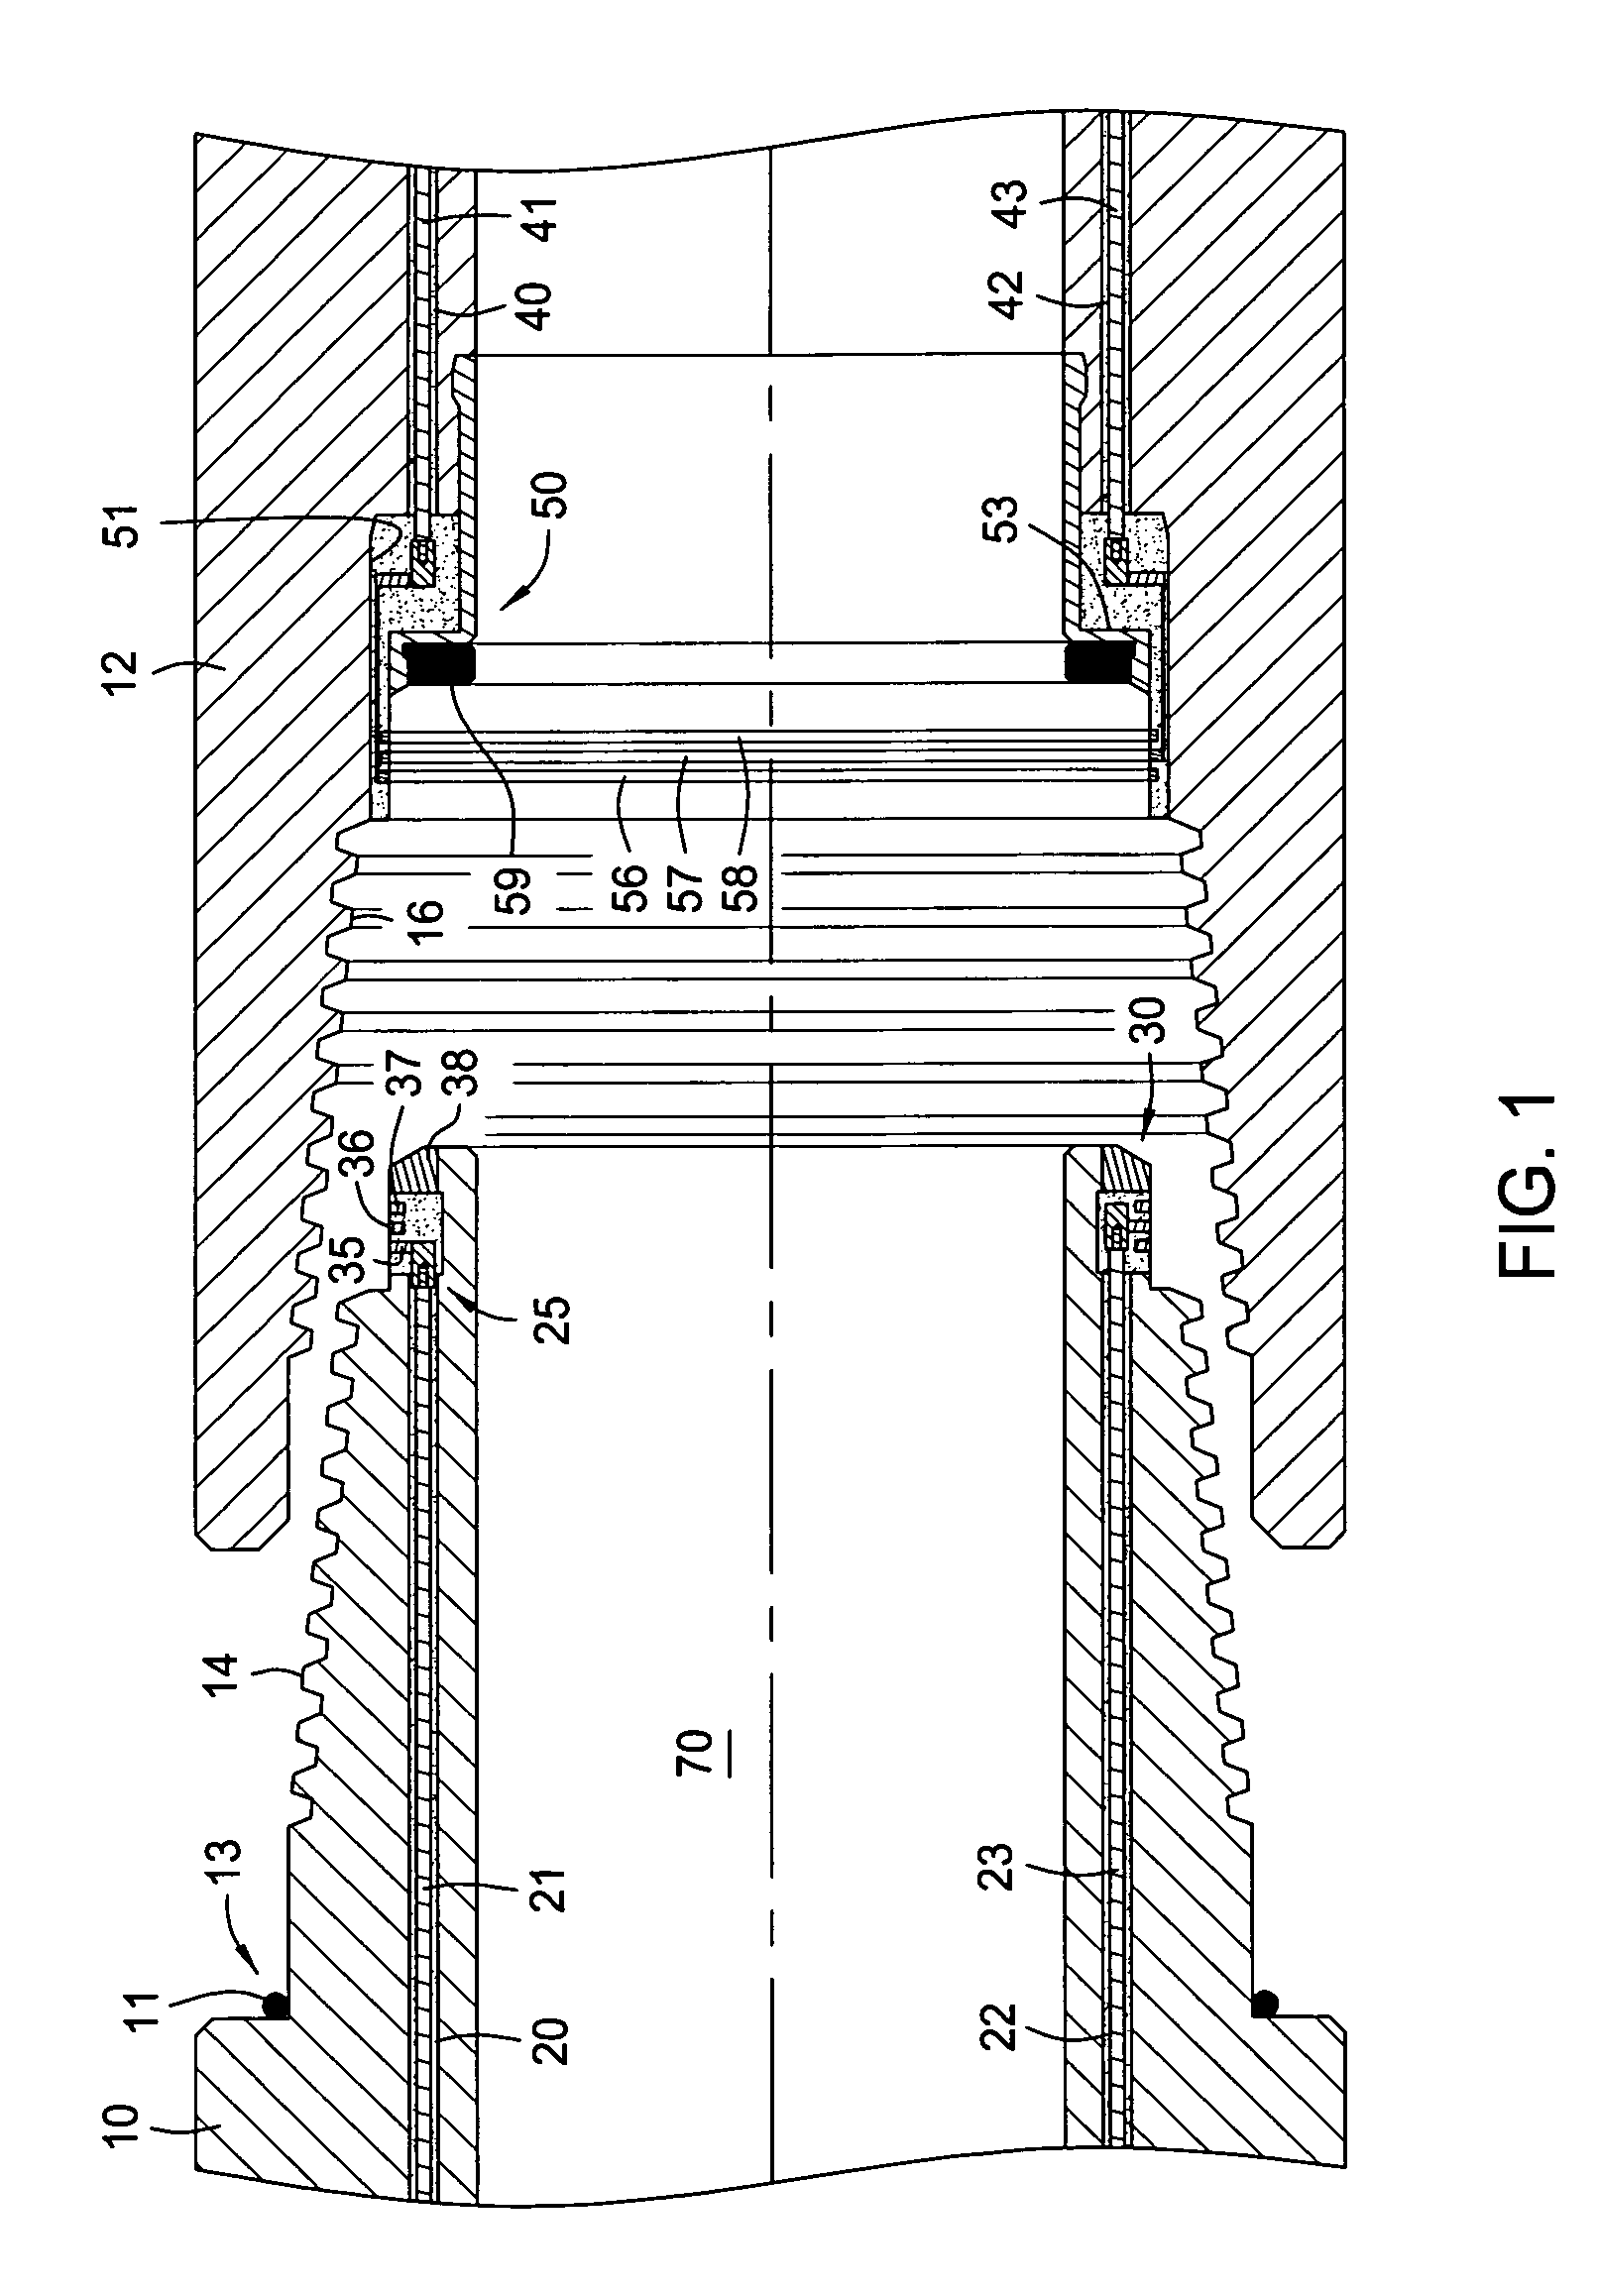 Electrical conducting system